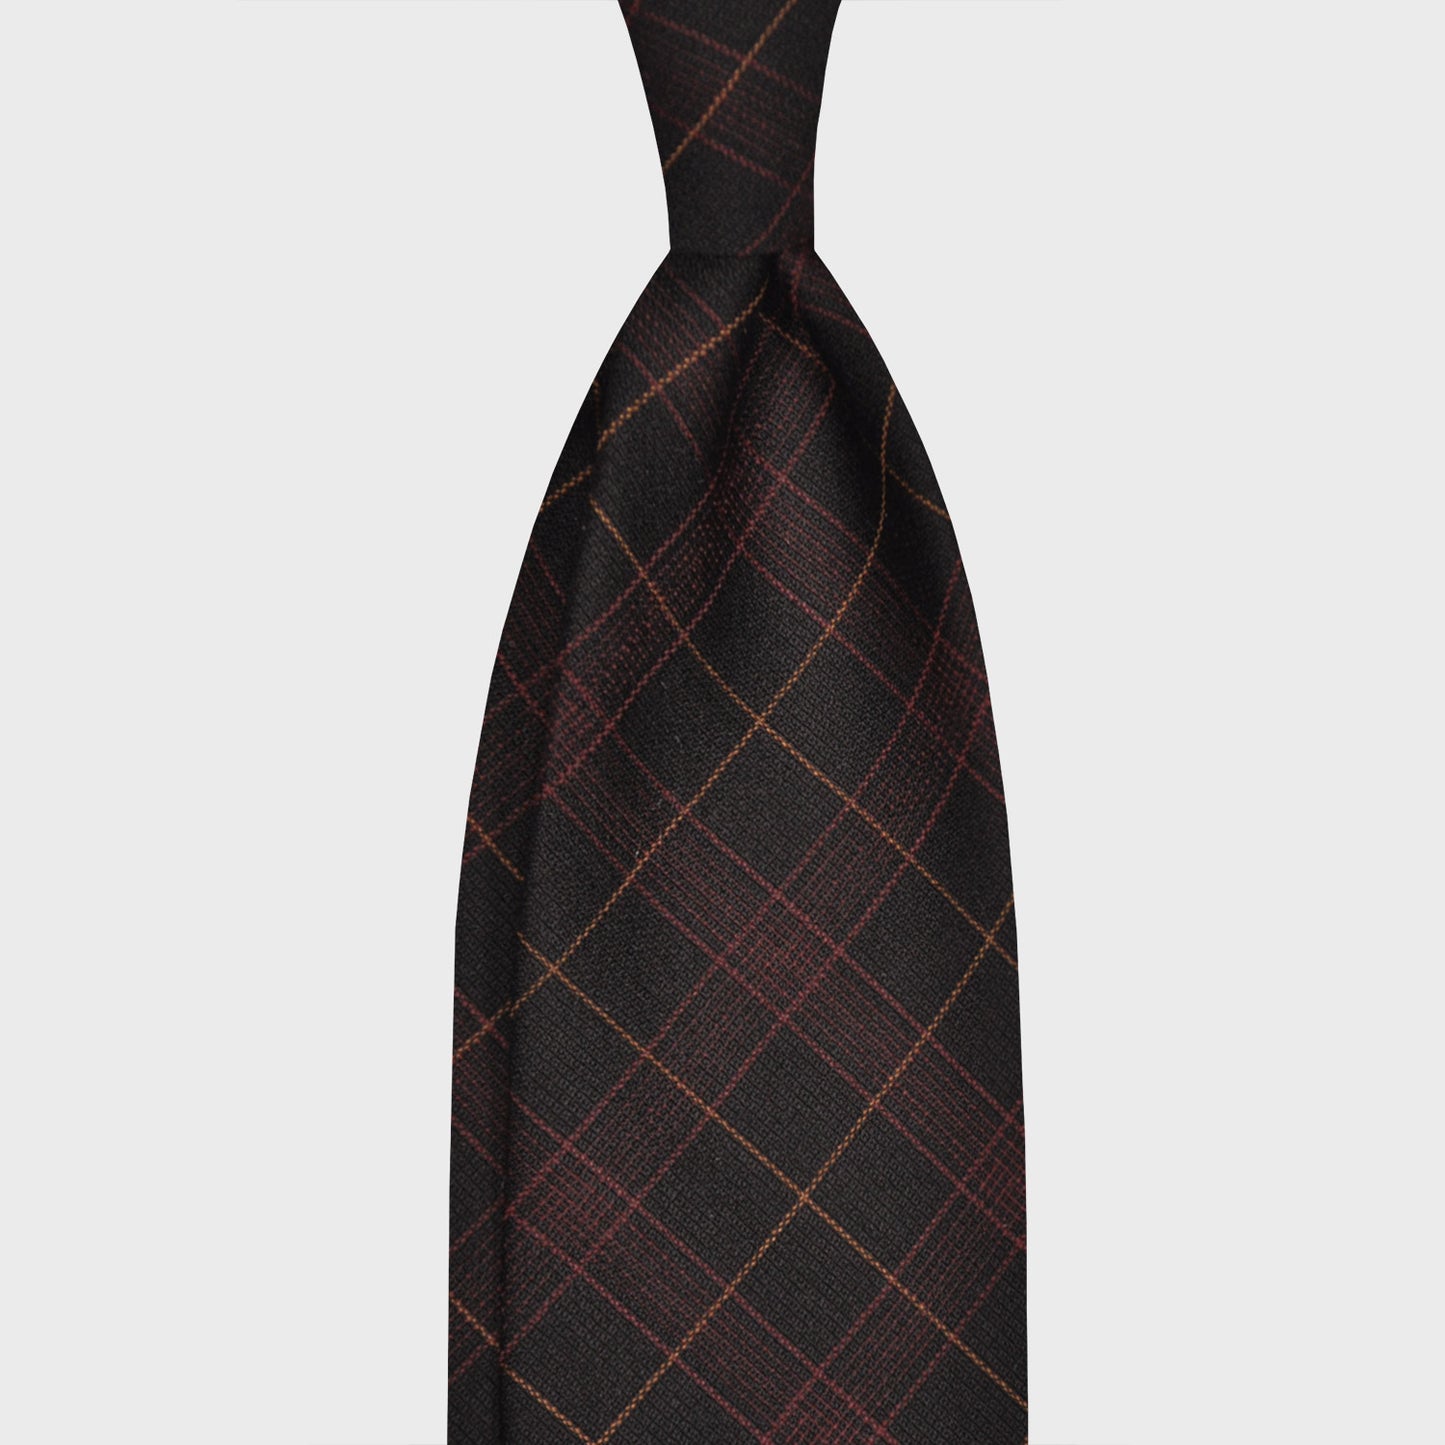 Load image into Gallery viewer, F.Marino Checked Wool Tie 3 Folds Gold-Wools Boutique Uomo
